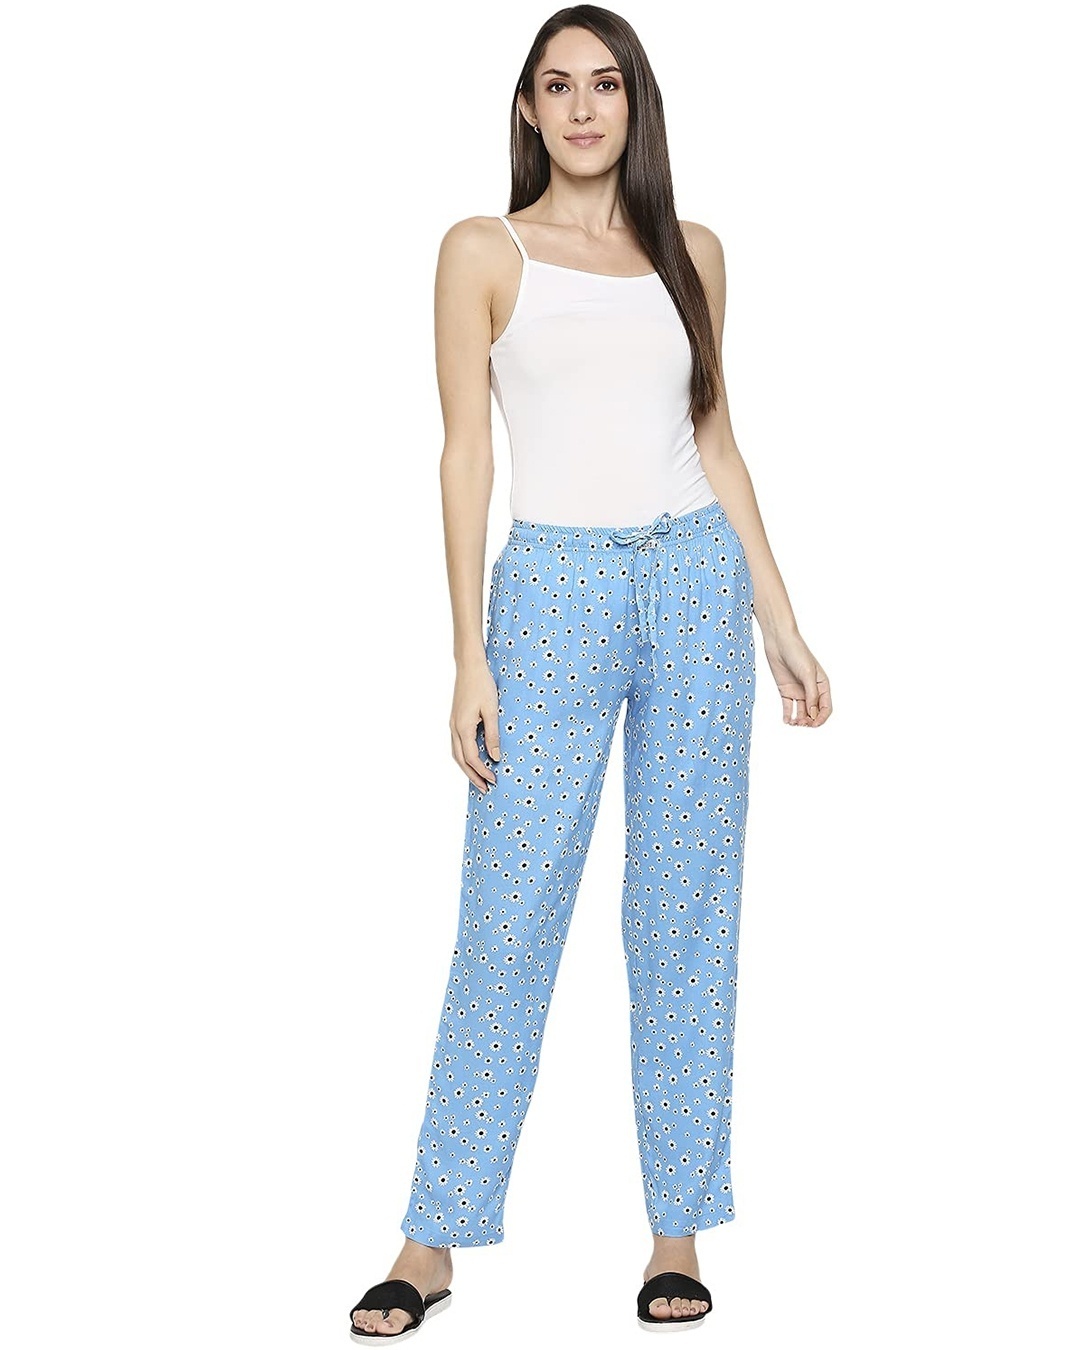 Shop Women's Blue All Over Floral Printed Pyjamas